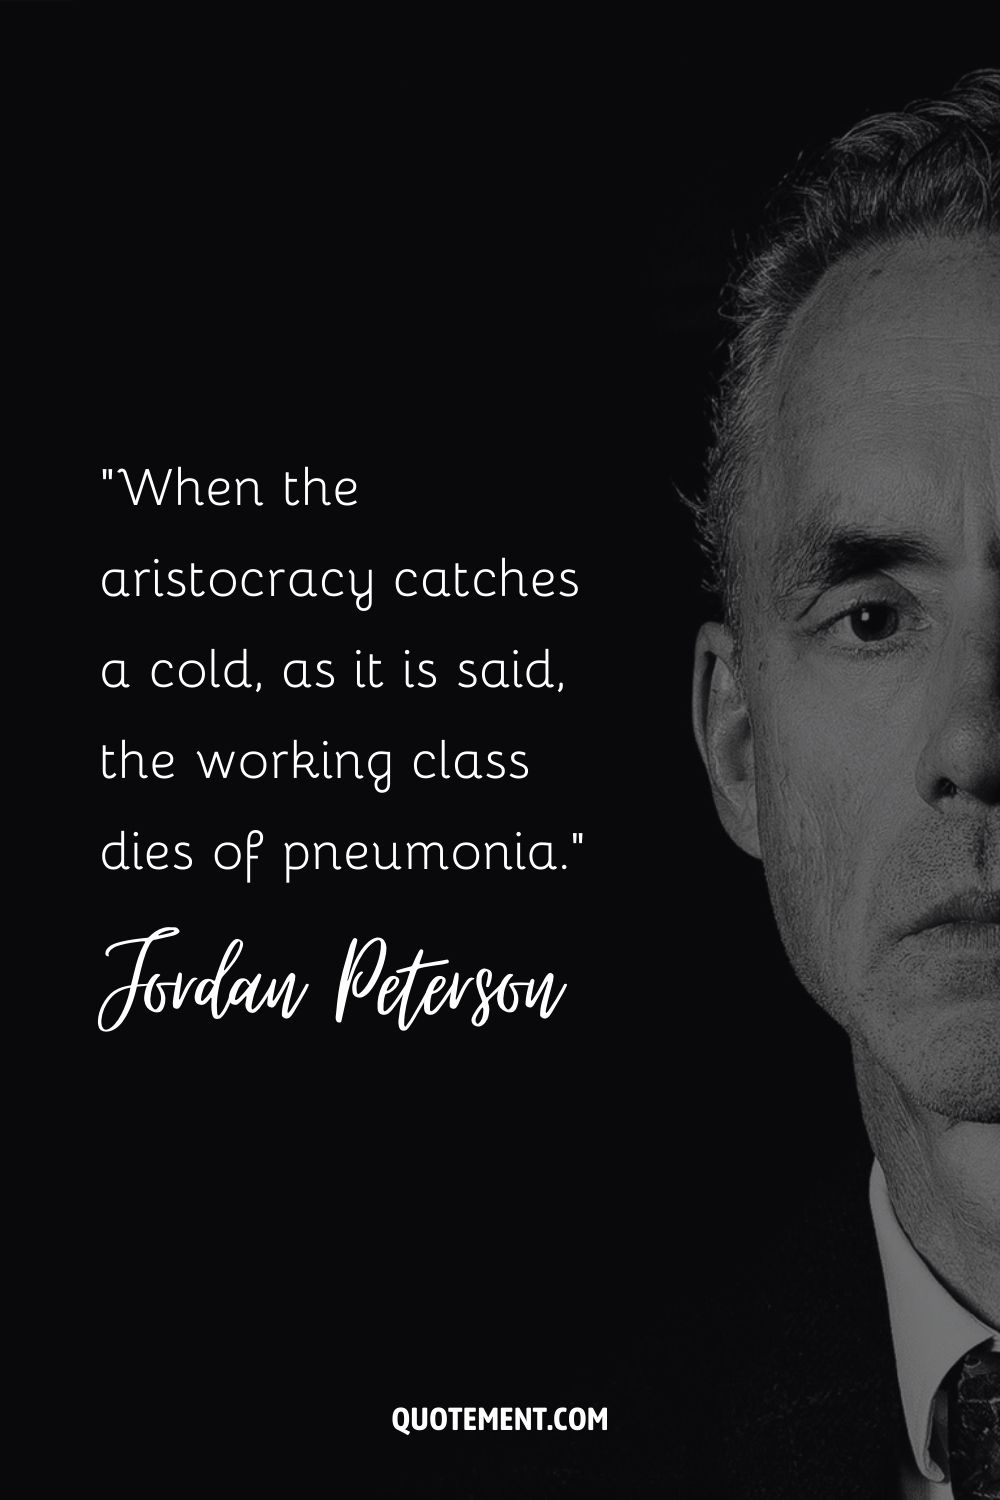 When the aristocracy catches a cold, as it is said, the working class dies of pneumonia